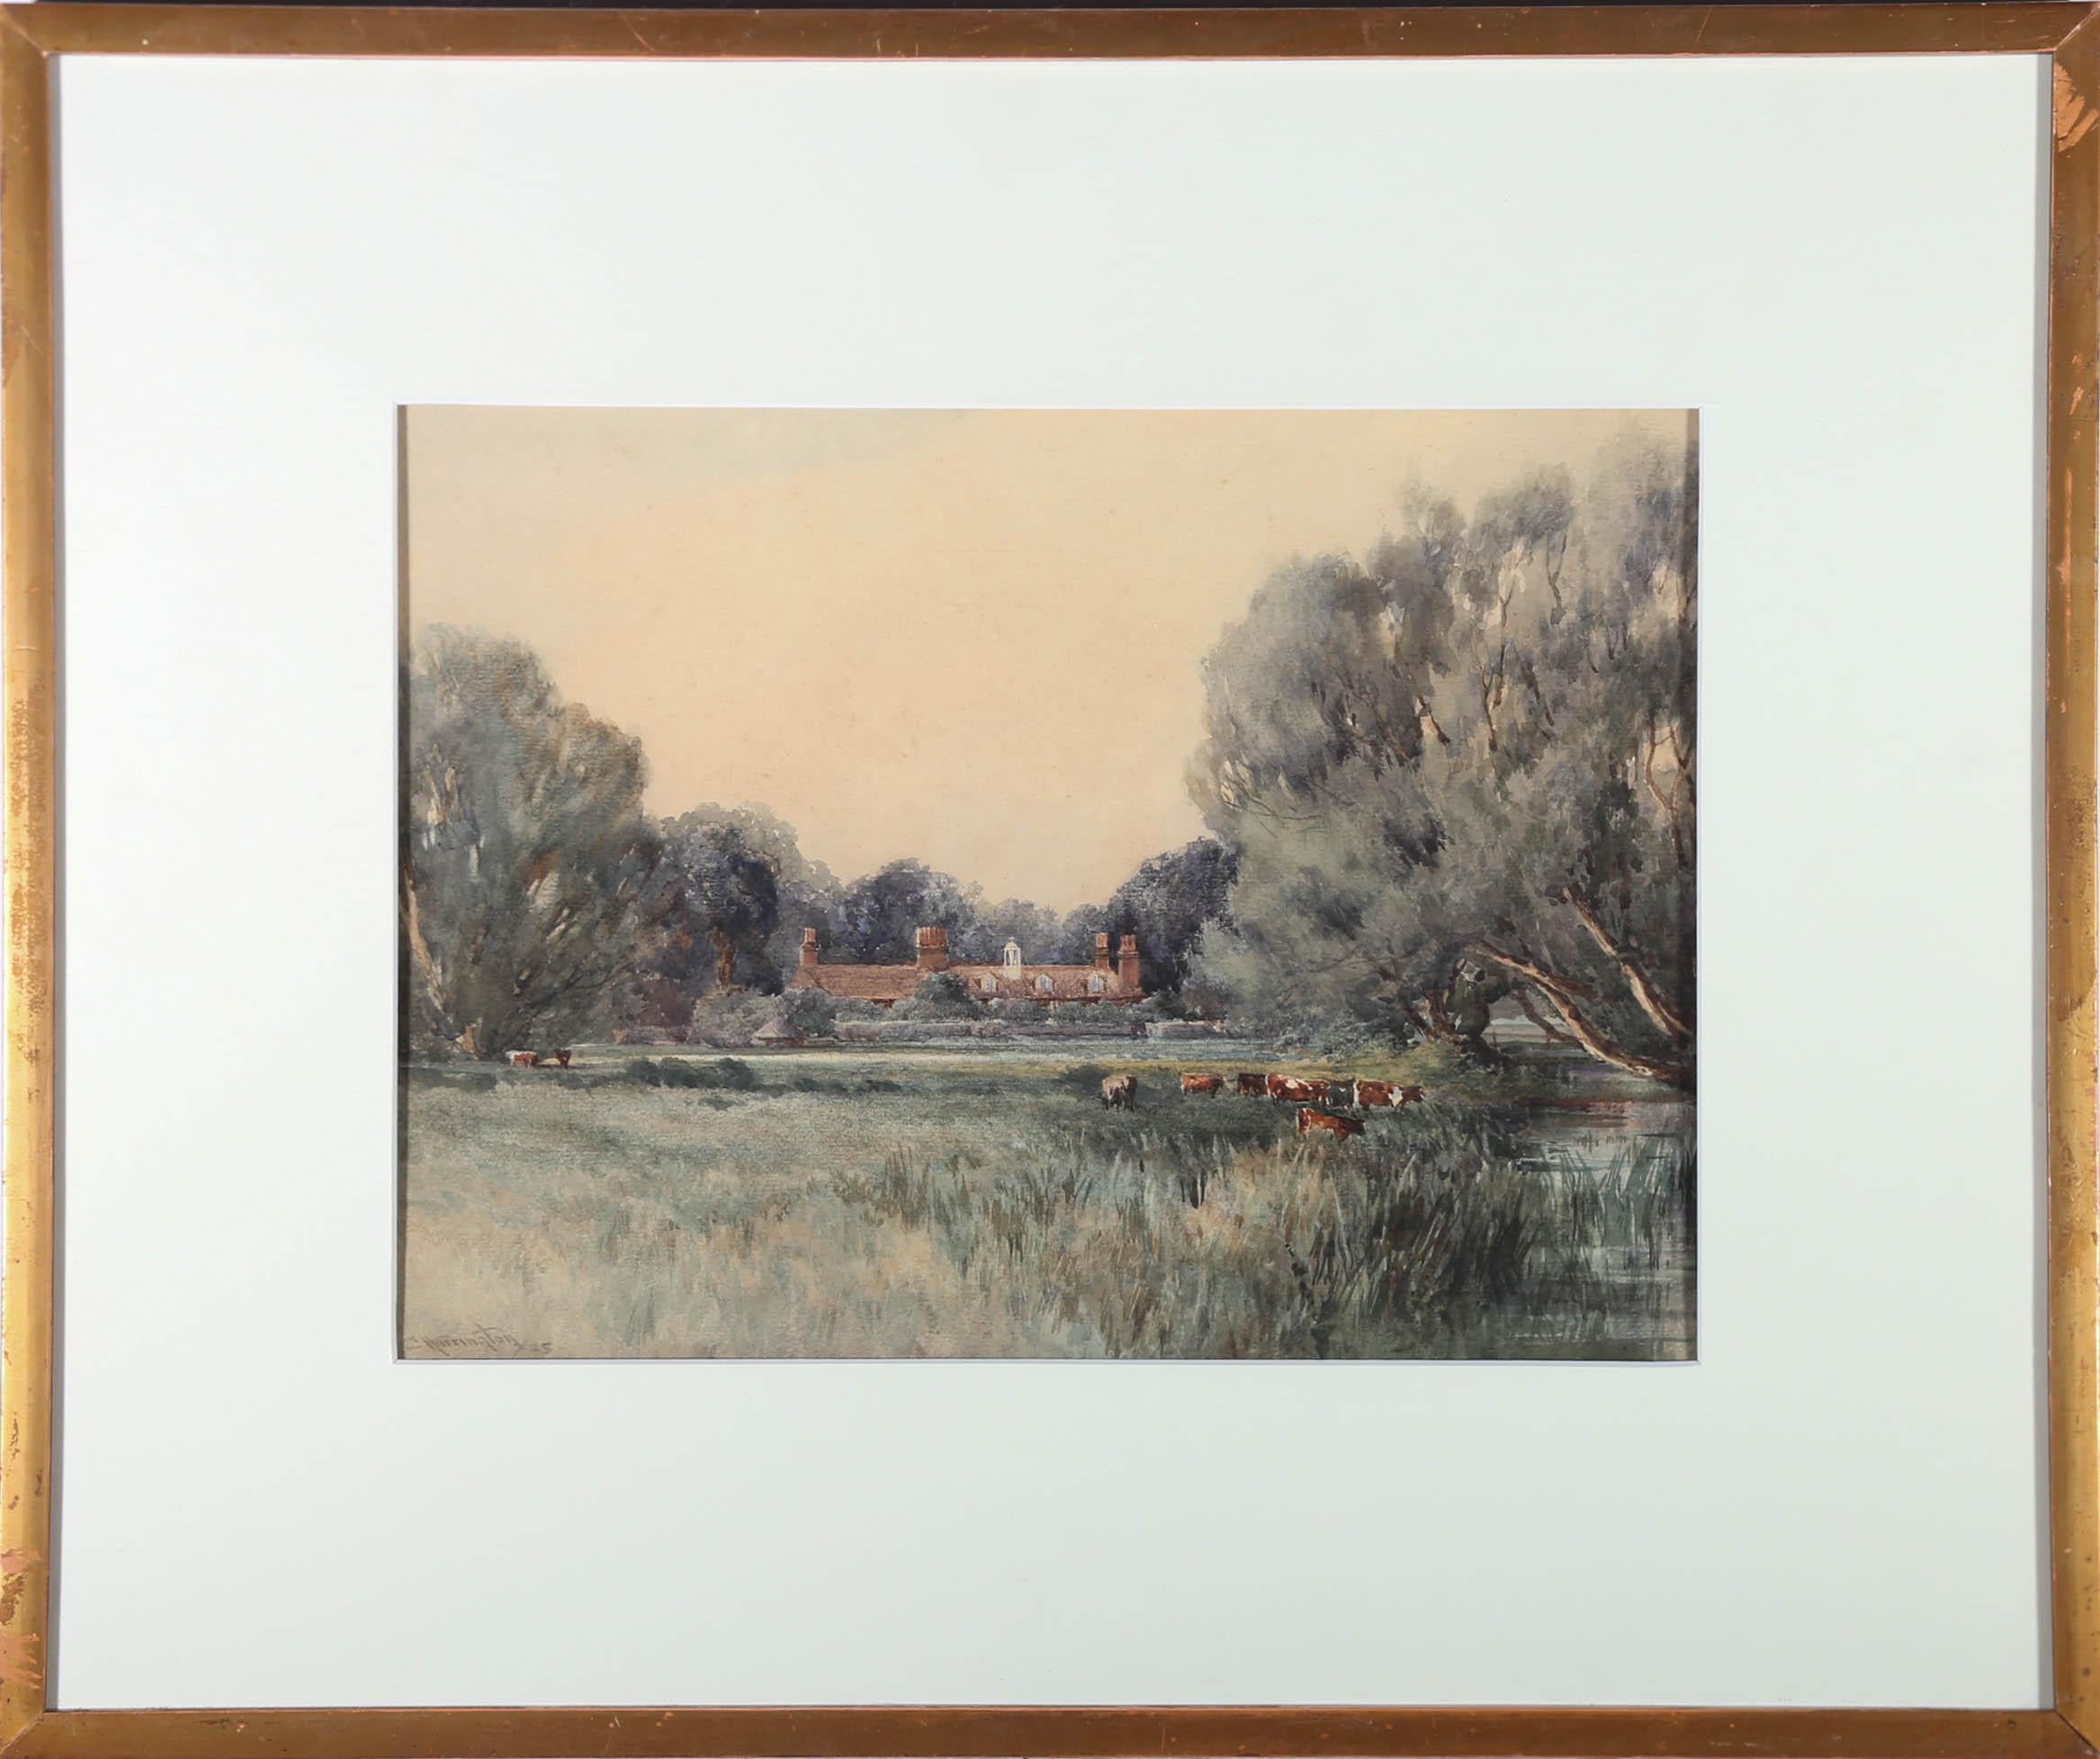 A fine early 20th century watercolour depicting inquisitive cattle grazing by the river. The pastoral landscape looks luscious and green, situated behind a long manor farm building. The painting has been signed and dated to the lower left. Elegantly